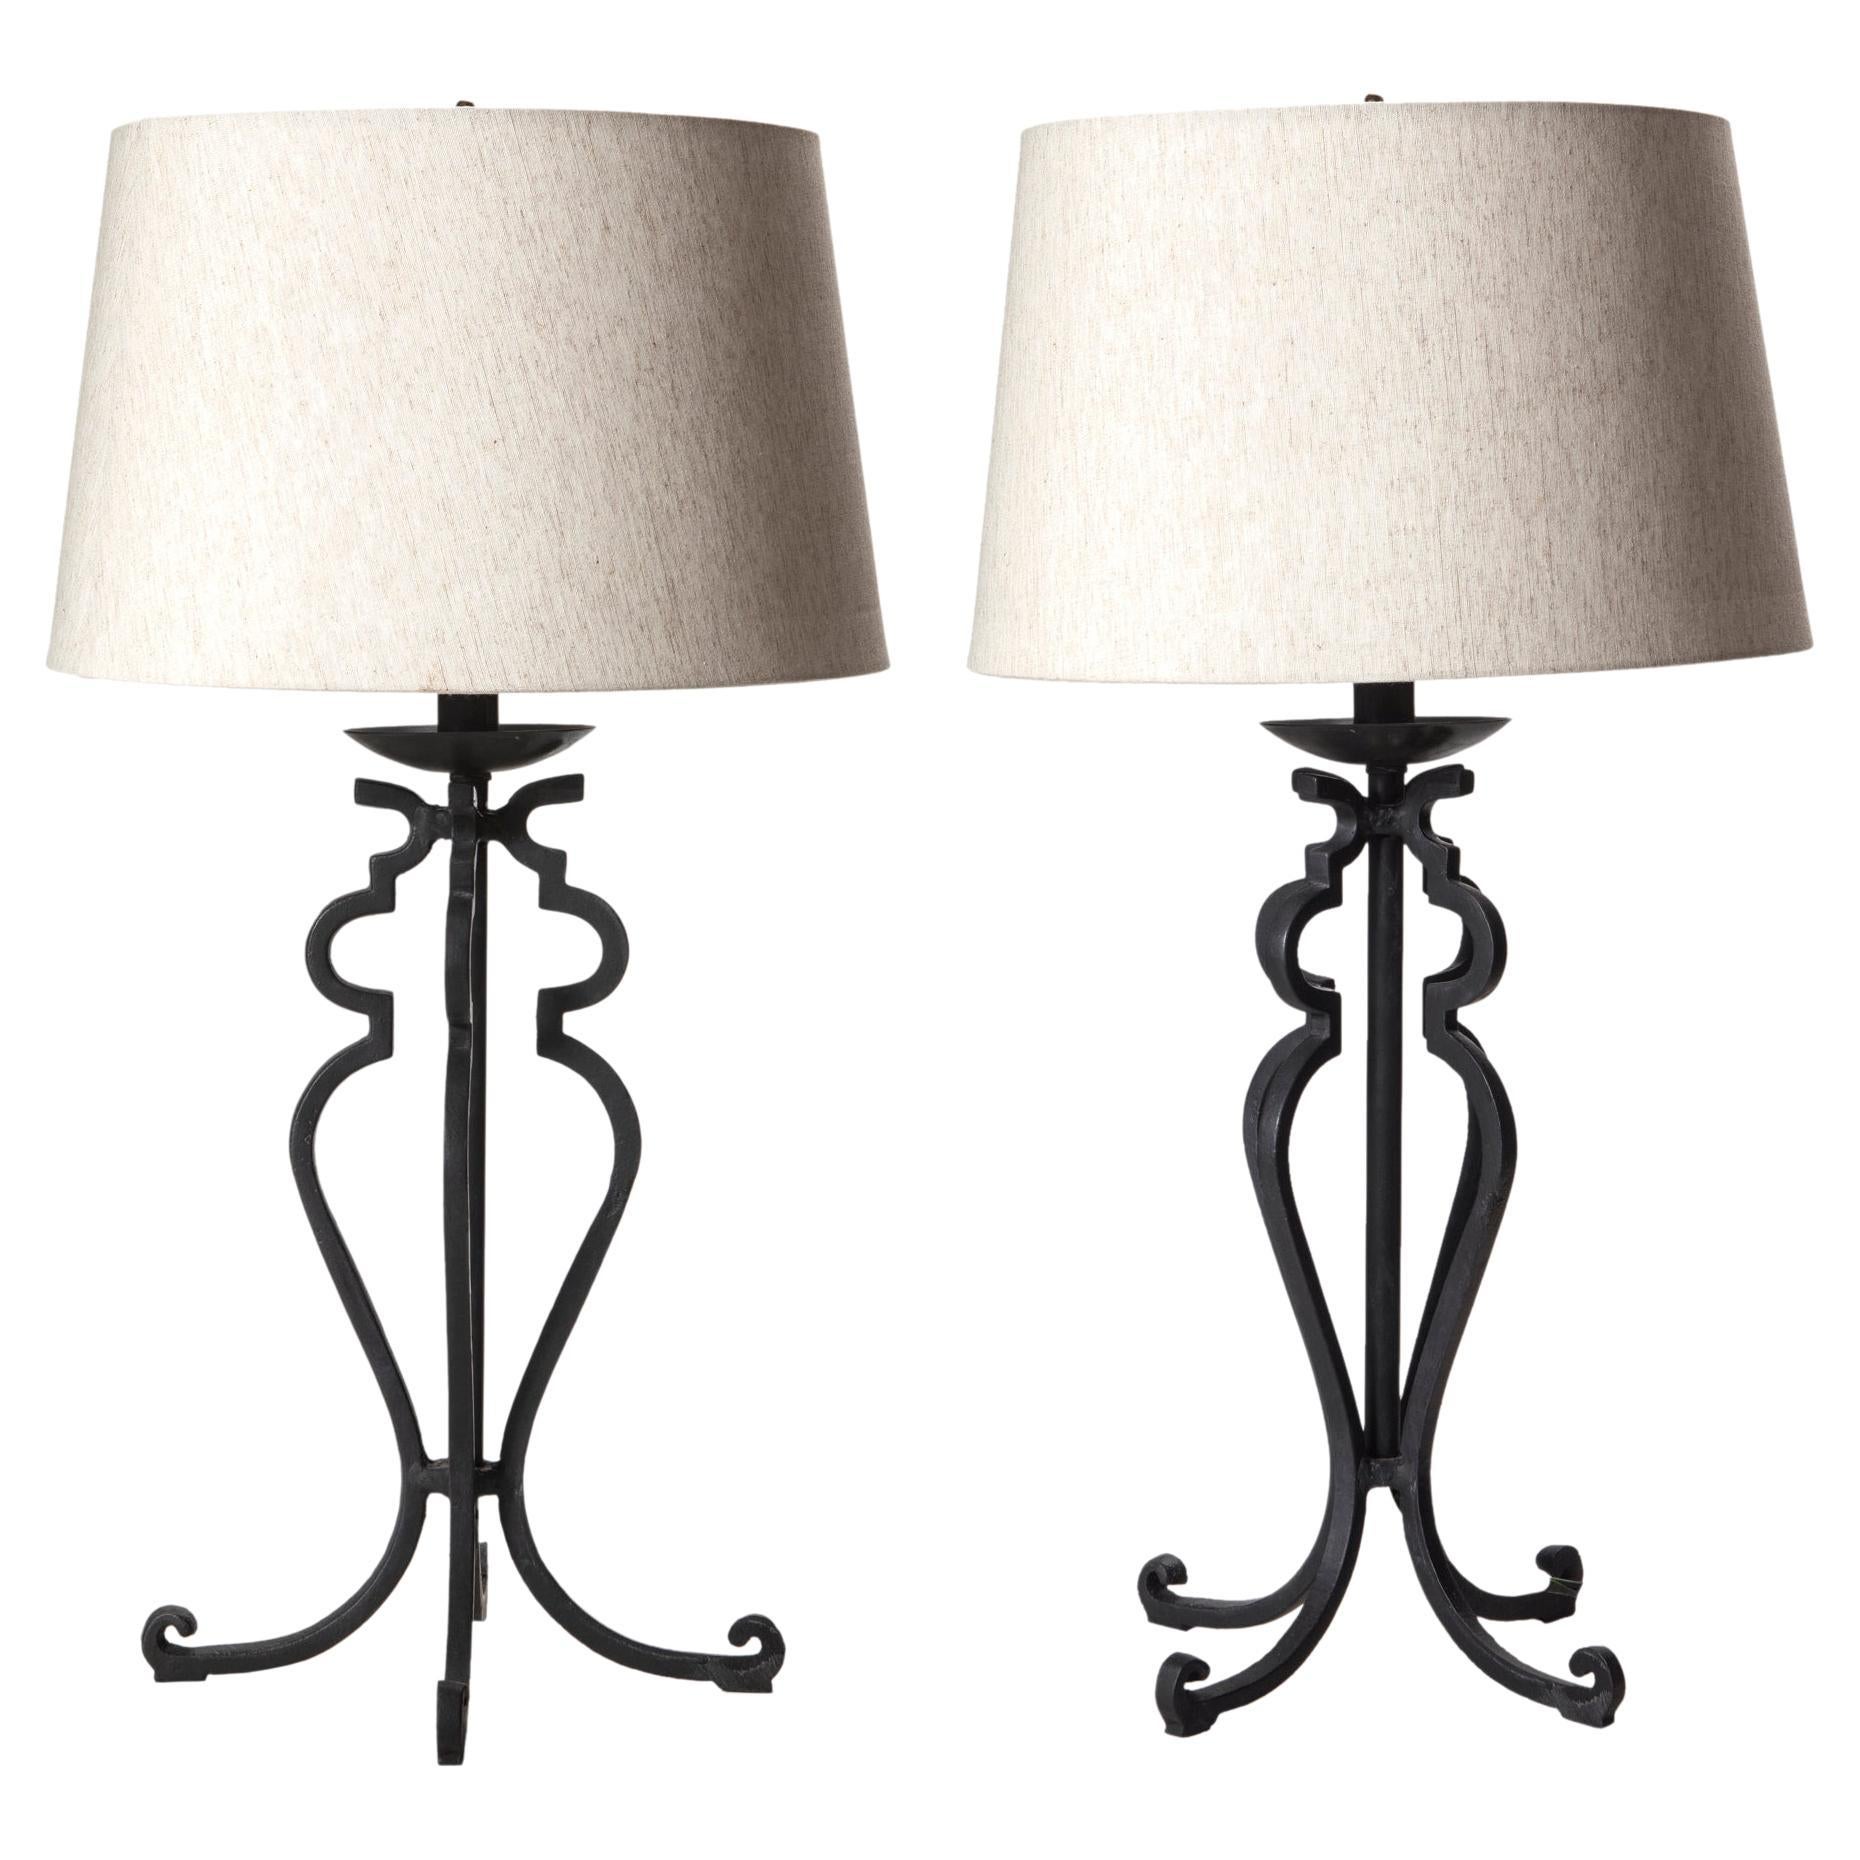 Handsome heavy hand wrought iron lamps constructed in square iron creating a stunning geometric silhouette. 